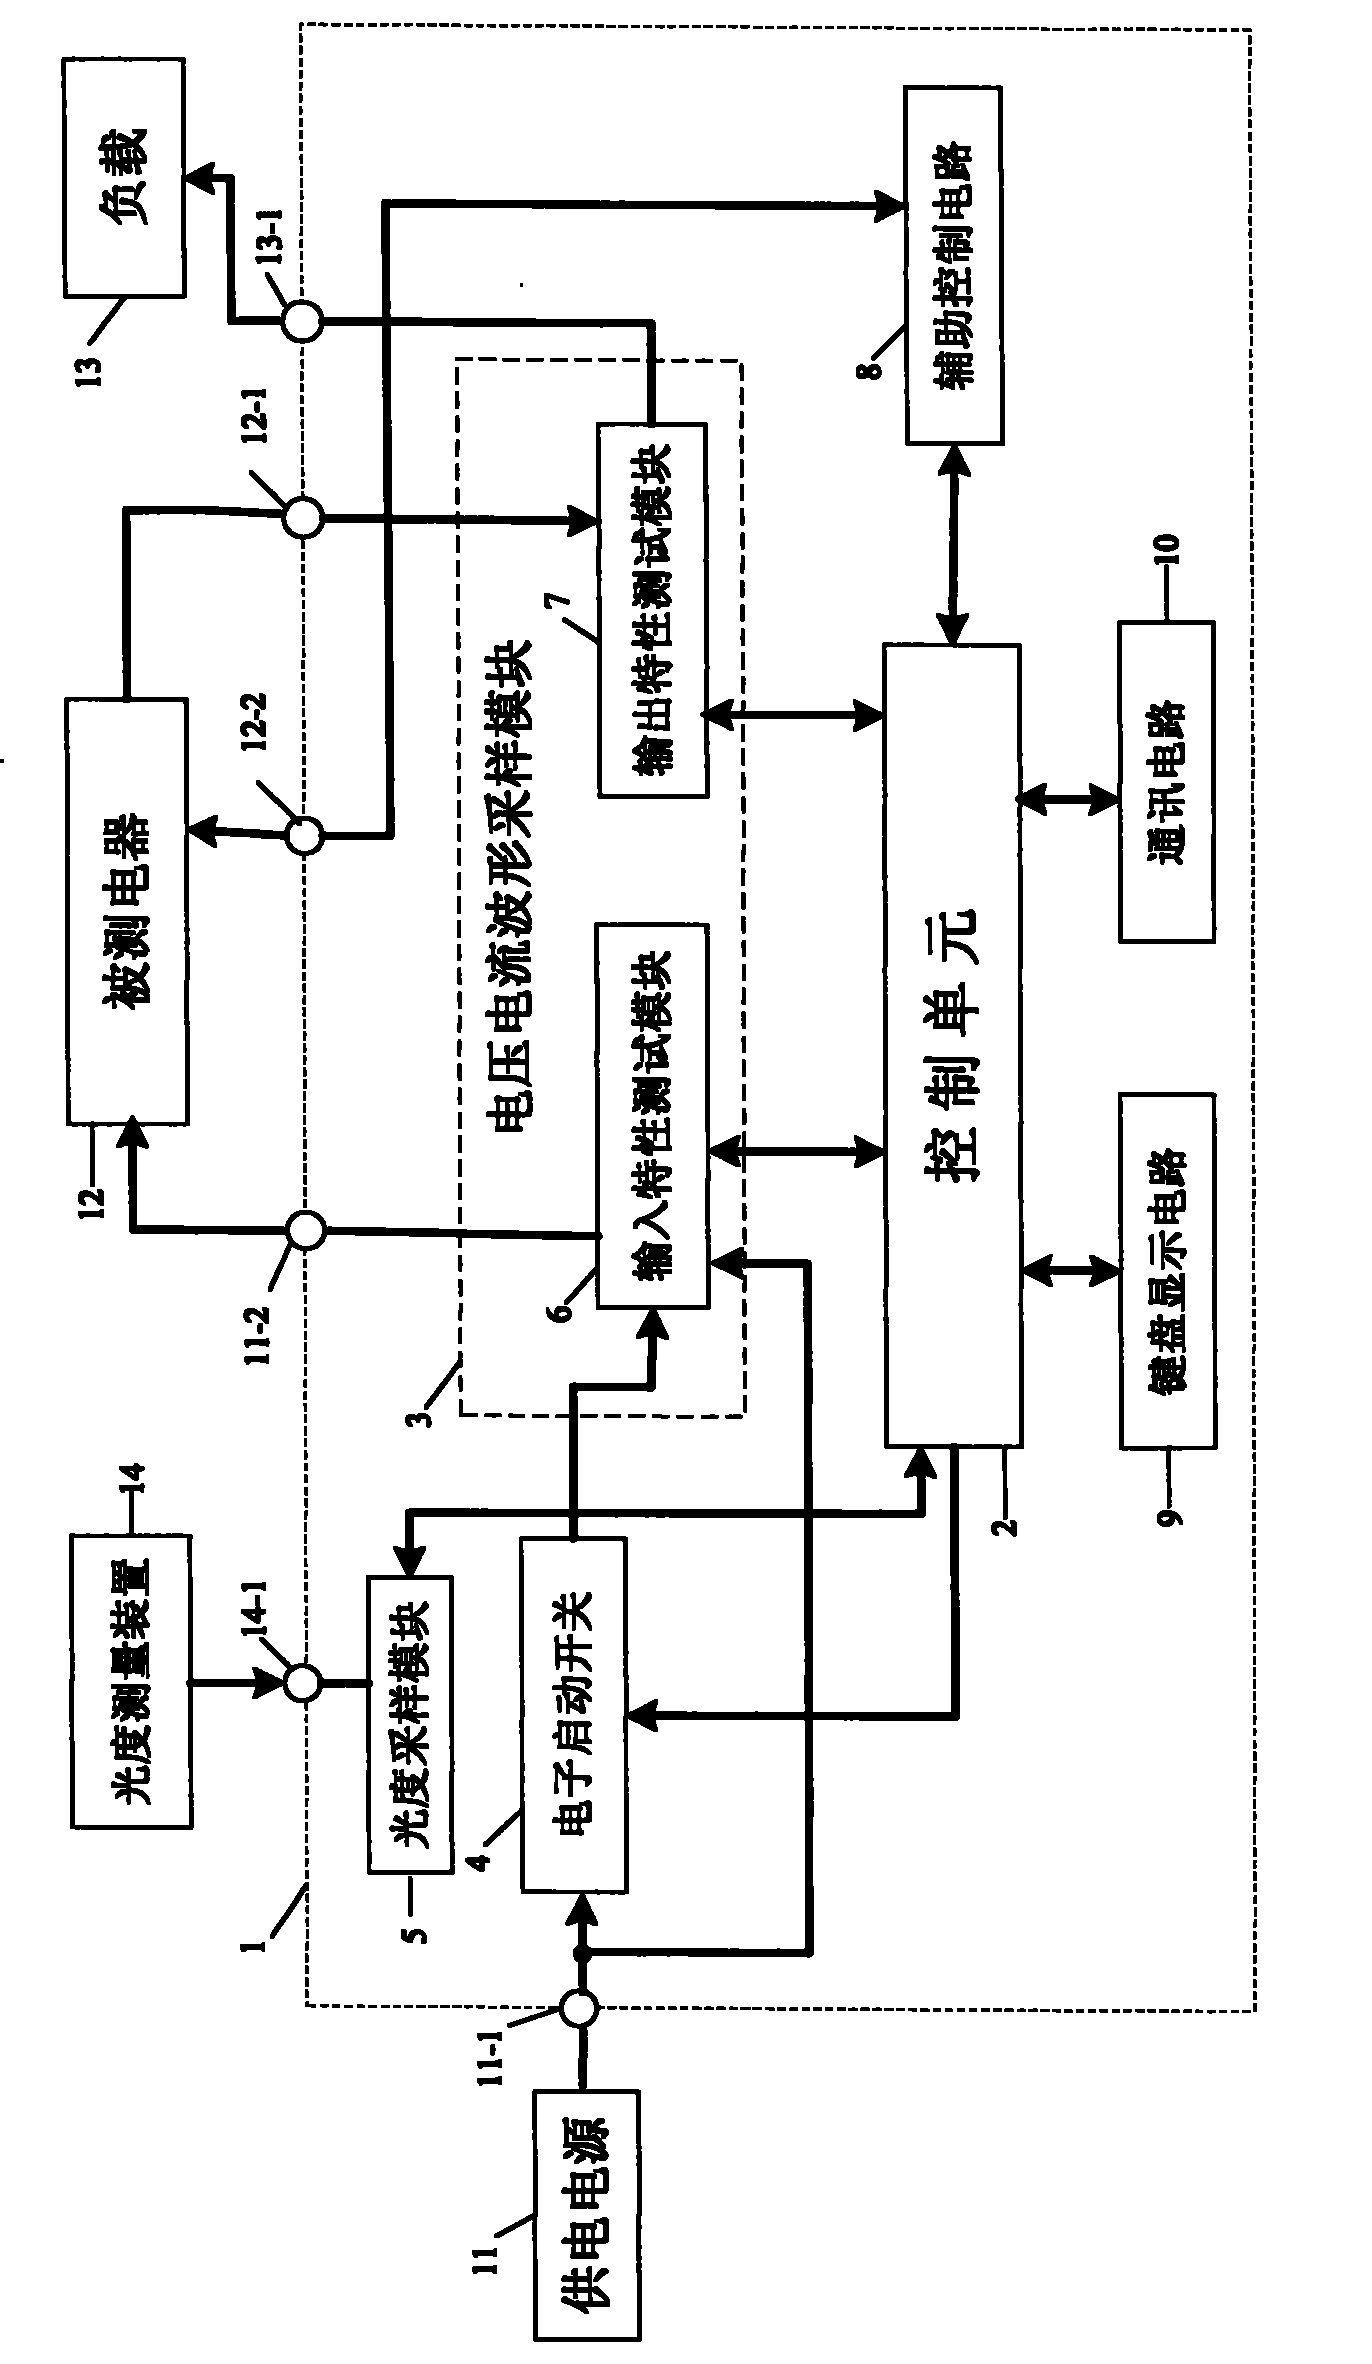 Electrical property measuring apparatus